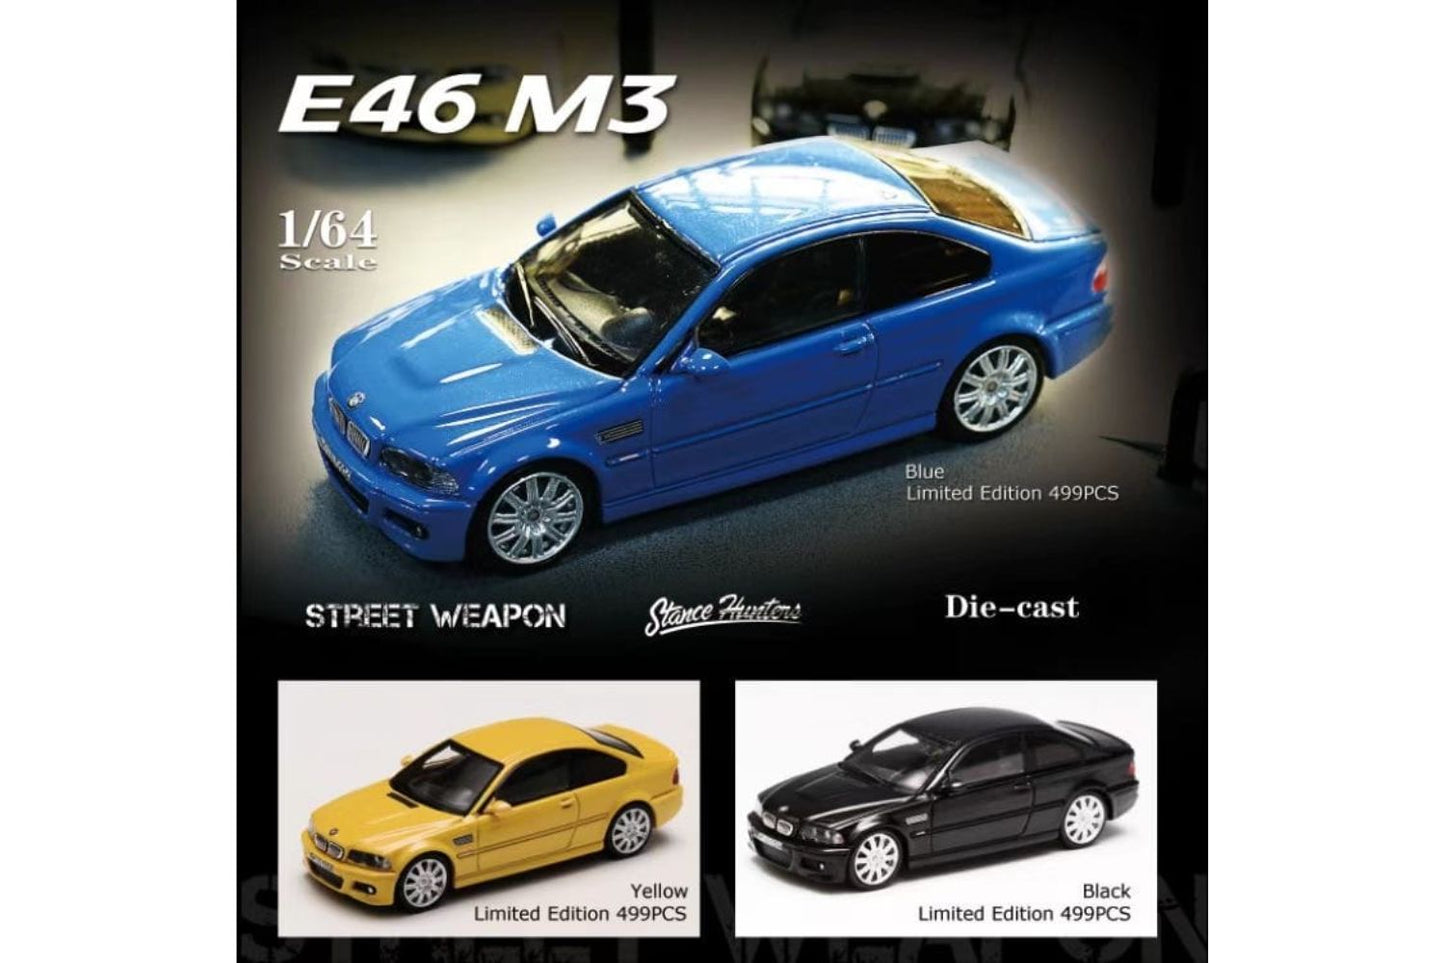 Stance Hunter x Street Weapon 1/64 BMW M3 (E46) Coupe in Black